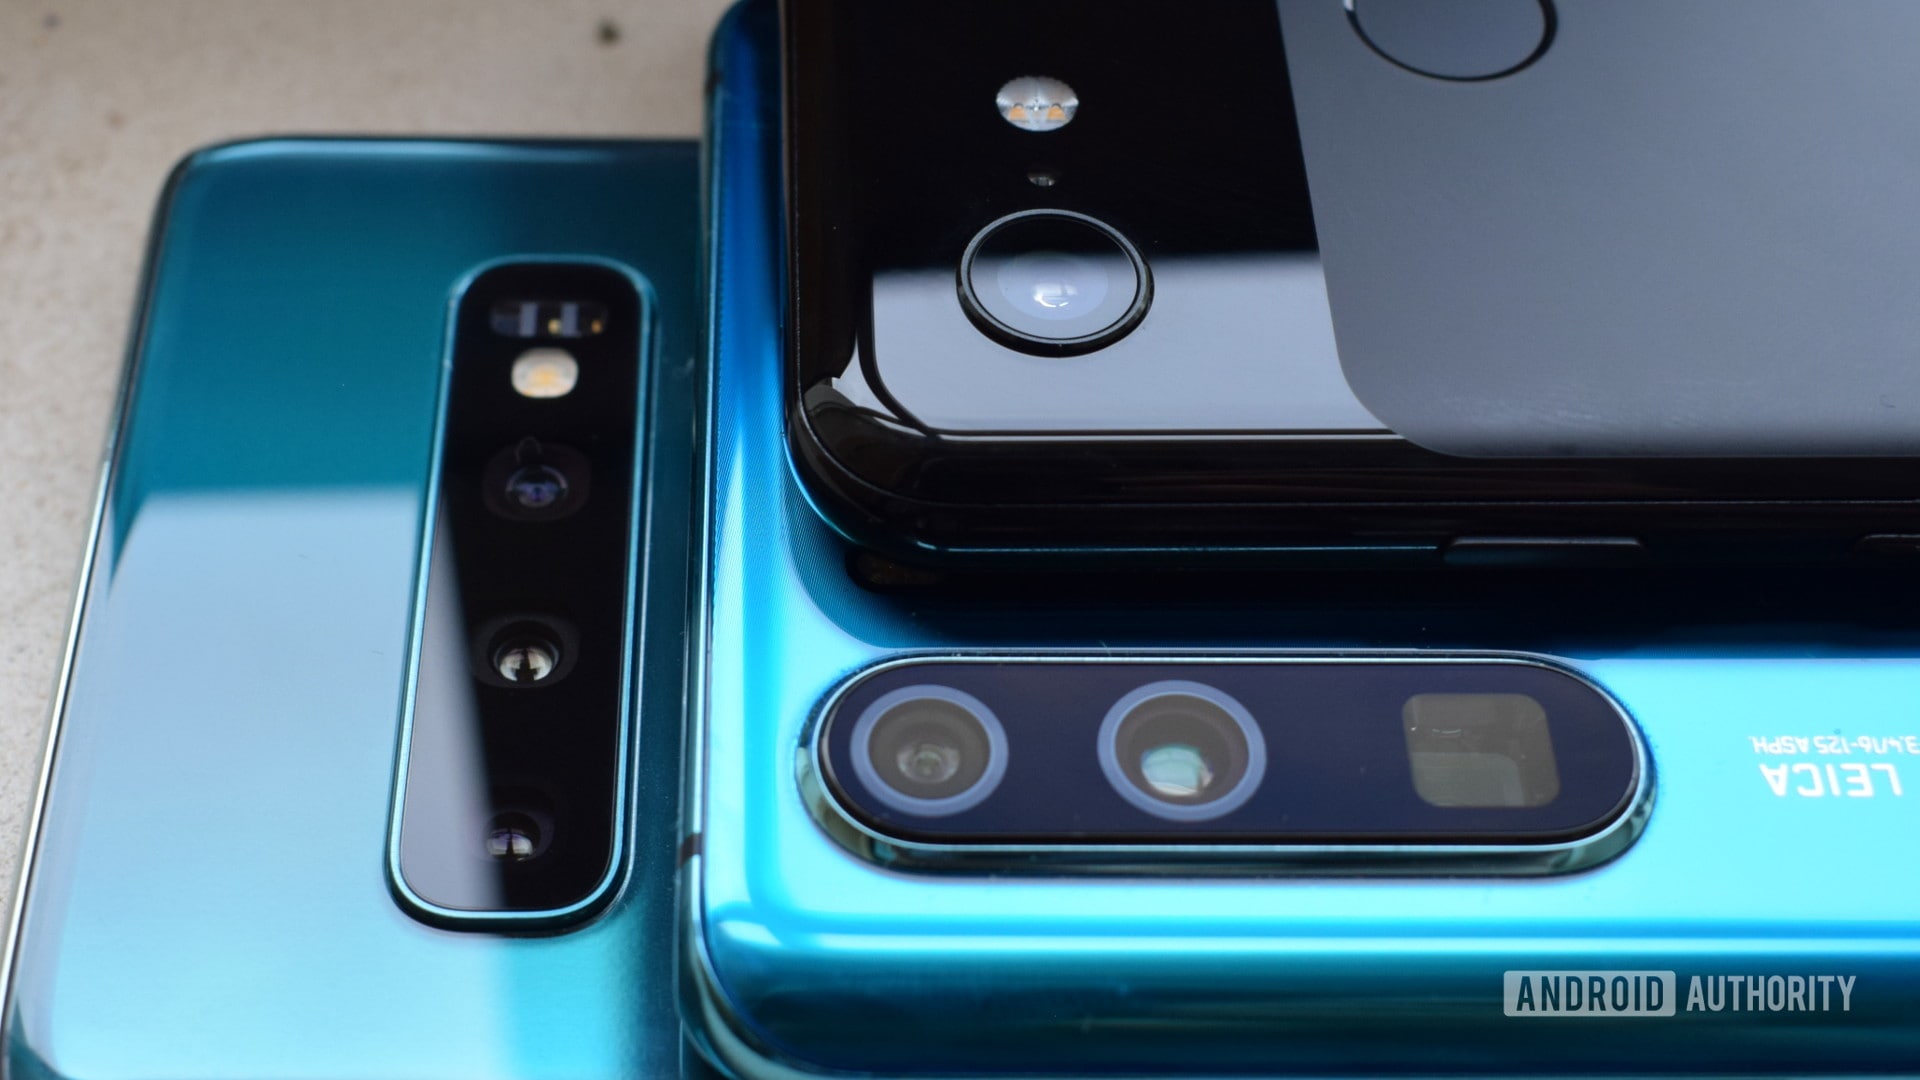 Camera lenses of the Samsung Galaxy S10, Google Pixel 3, and HUAWEI P30 Pro